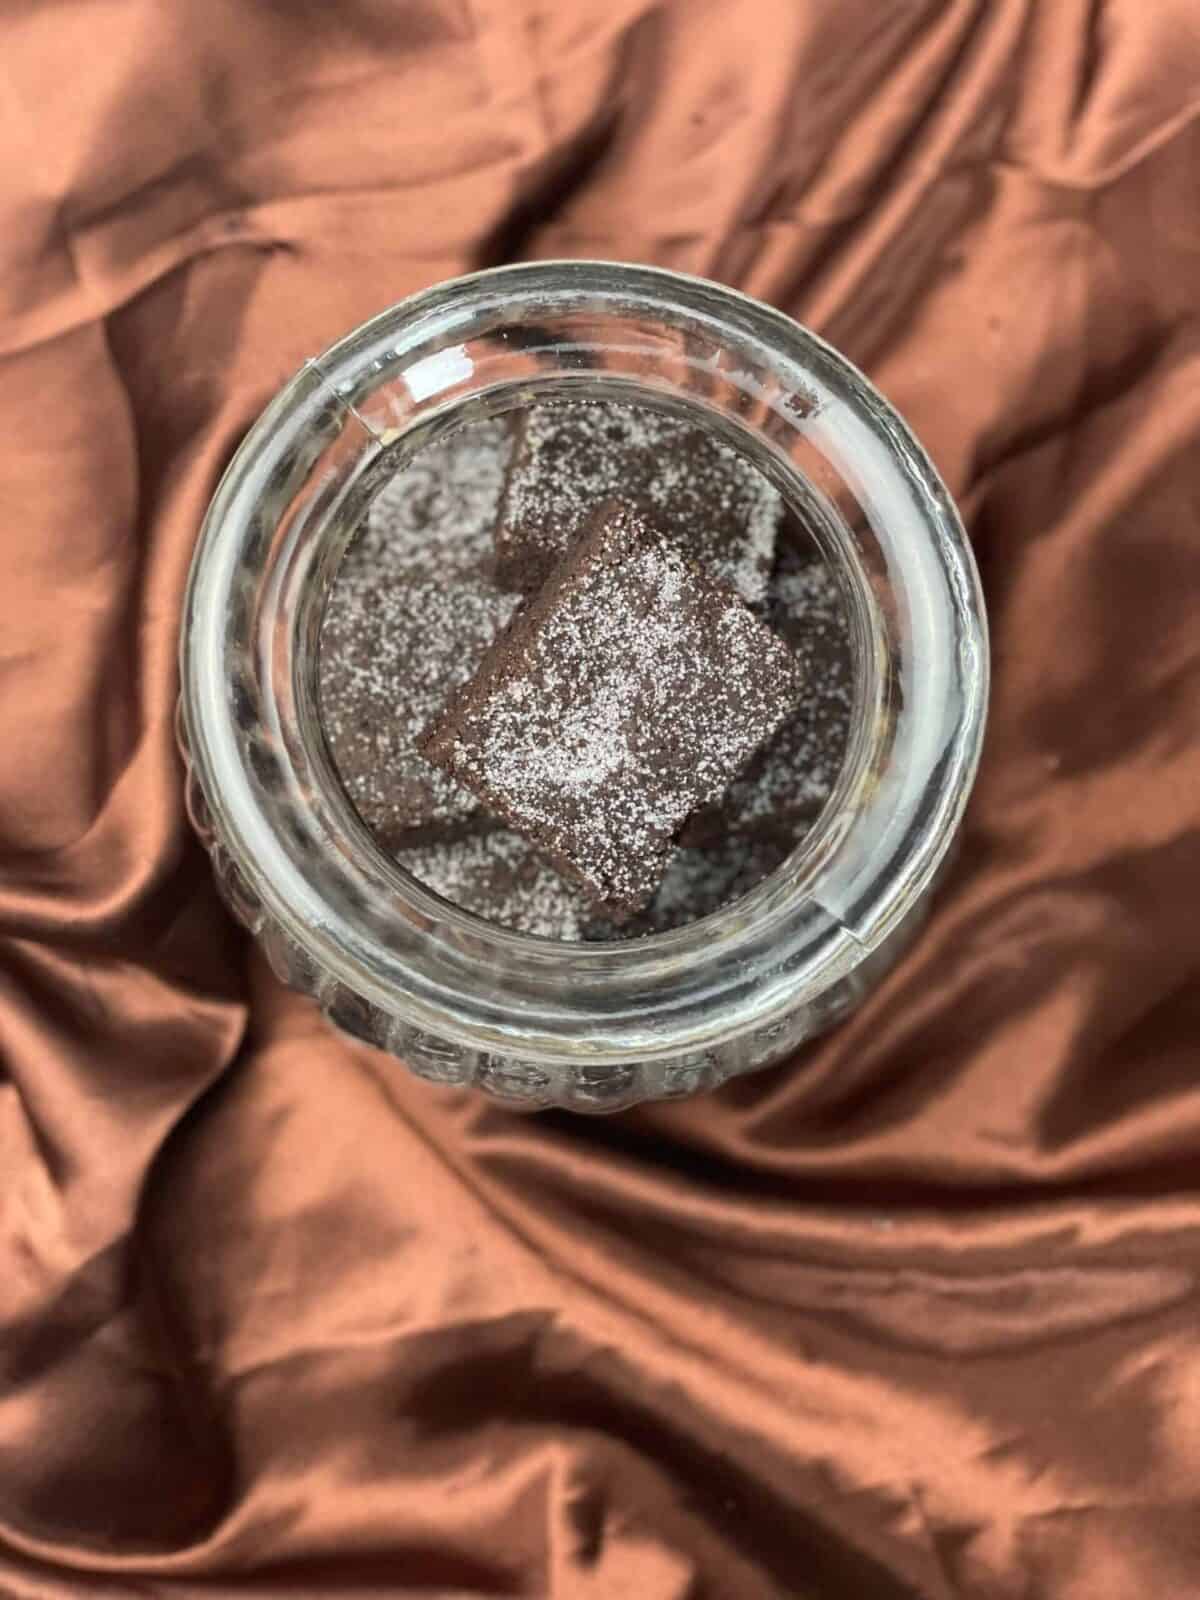 Concrete cake placed in glass jar with brown background.